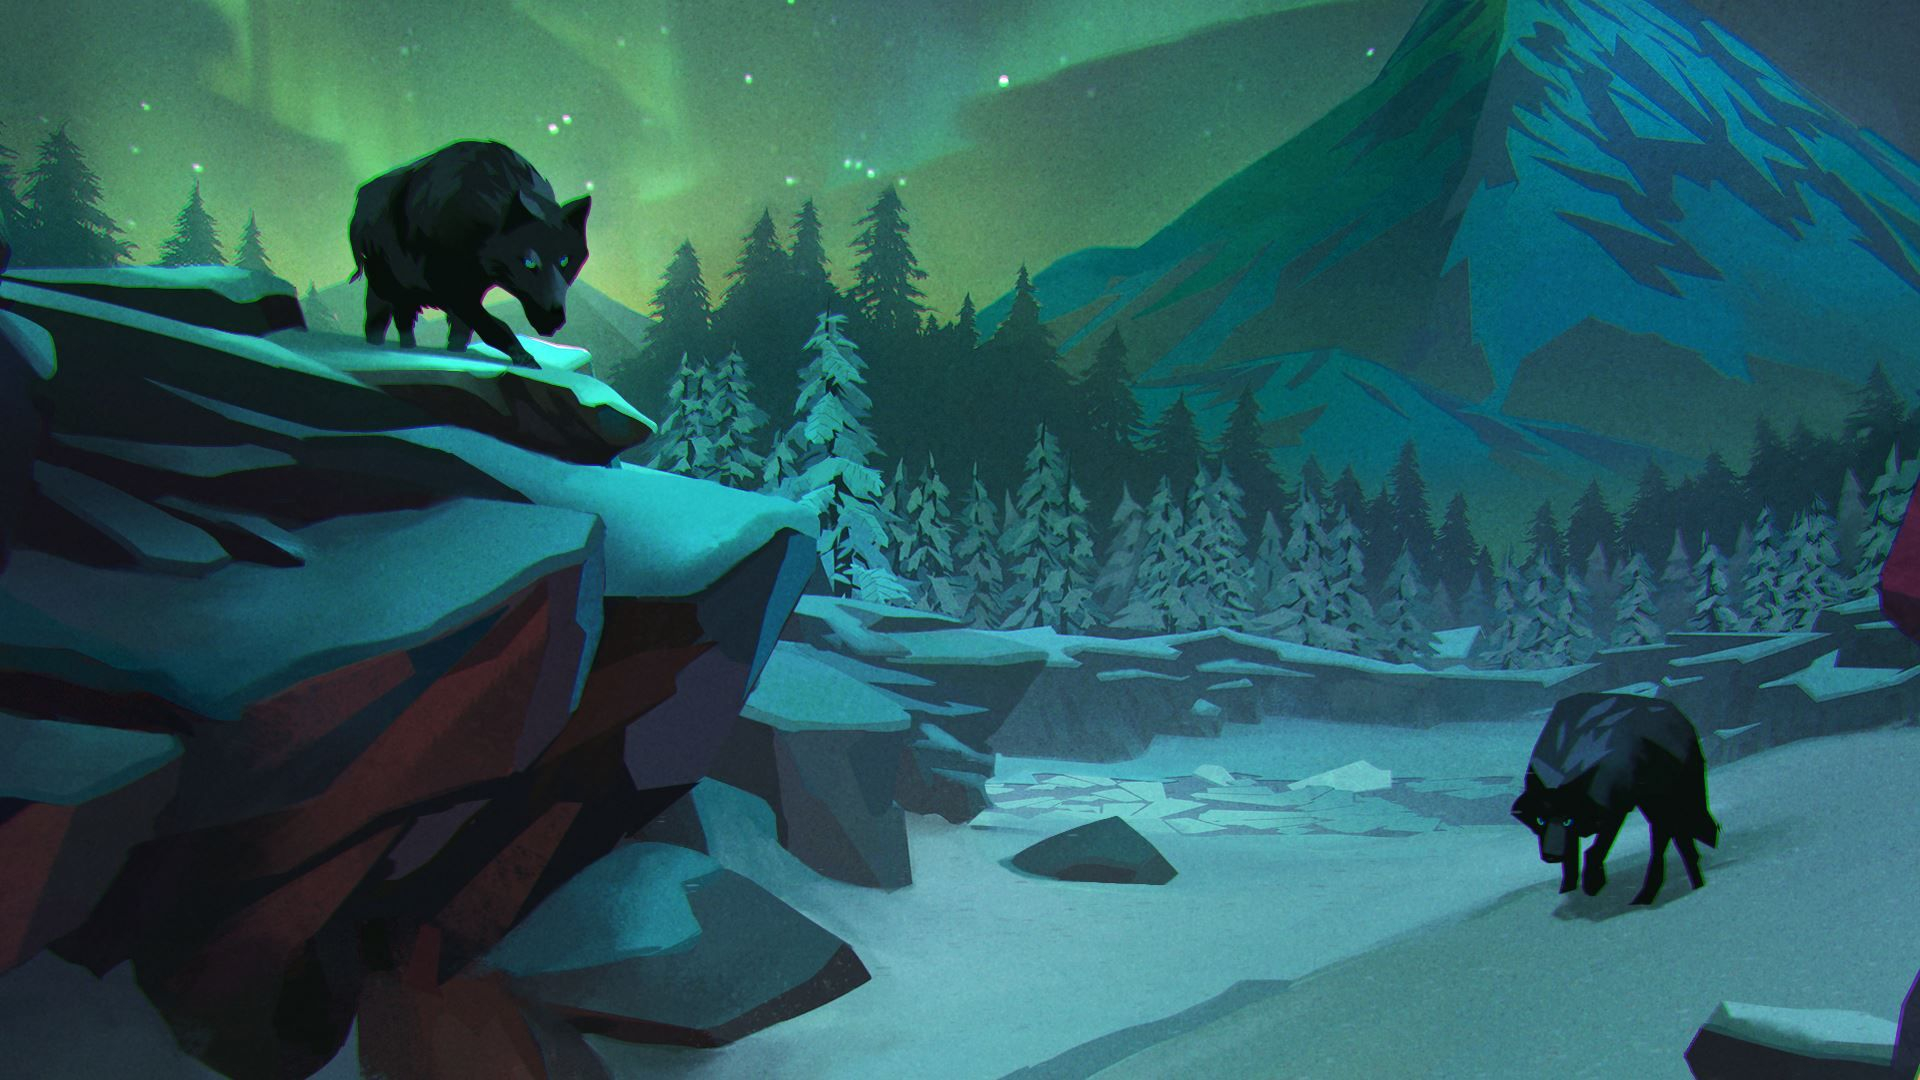 1920x1080 The Long Dark Episode 3, Episodes 1 And 2 Redux Coming December 2018 | The long dark, Survival games, Survival